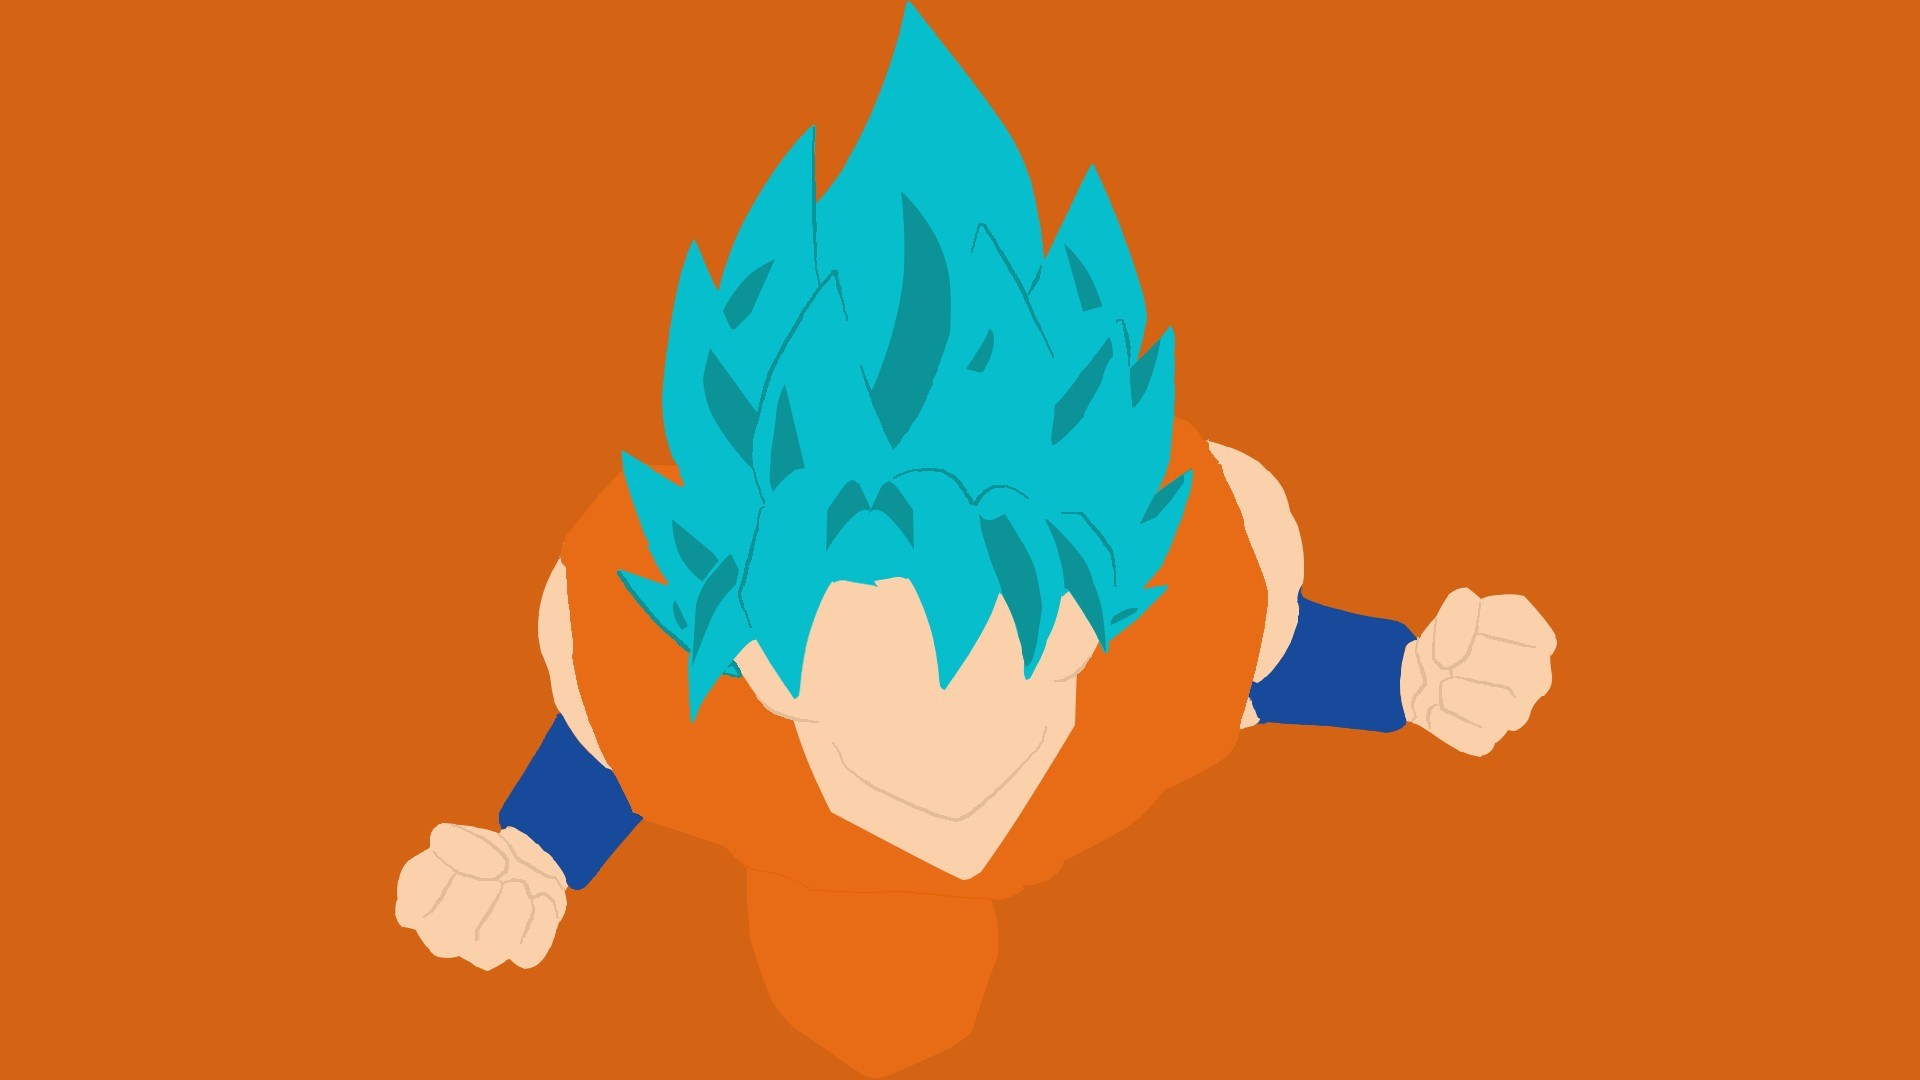 Wallpapers Goku SSJ Blue With Resolution 1920X1080 pixel. You can make this wallpaper for your Desktop Computer Backgrounds, Mac Wallpapers, Android Lock screen or iPhone Screensavers